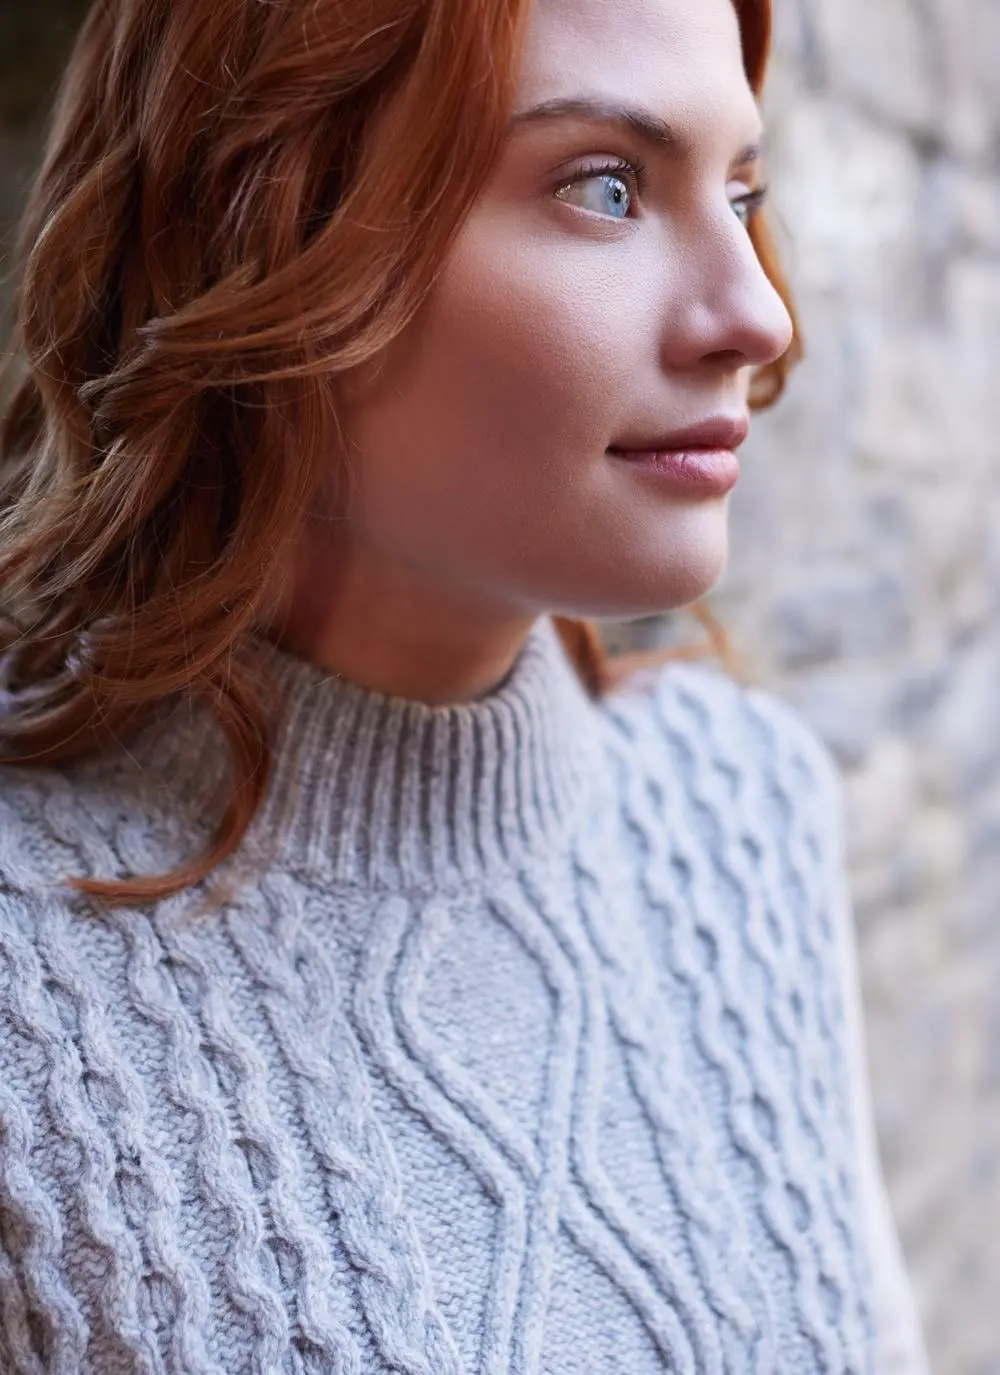 close-up of red haired woman standing in stone abbey wearing a grey sleeveless aran sweater